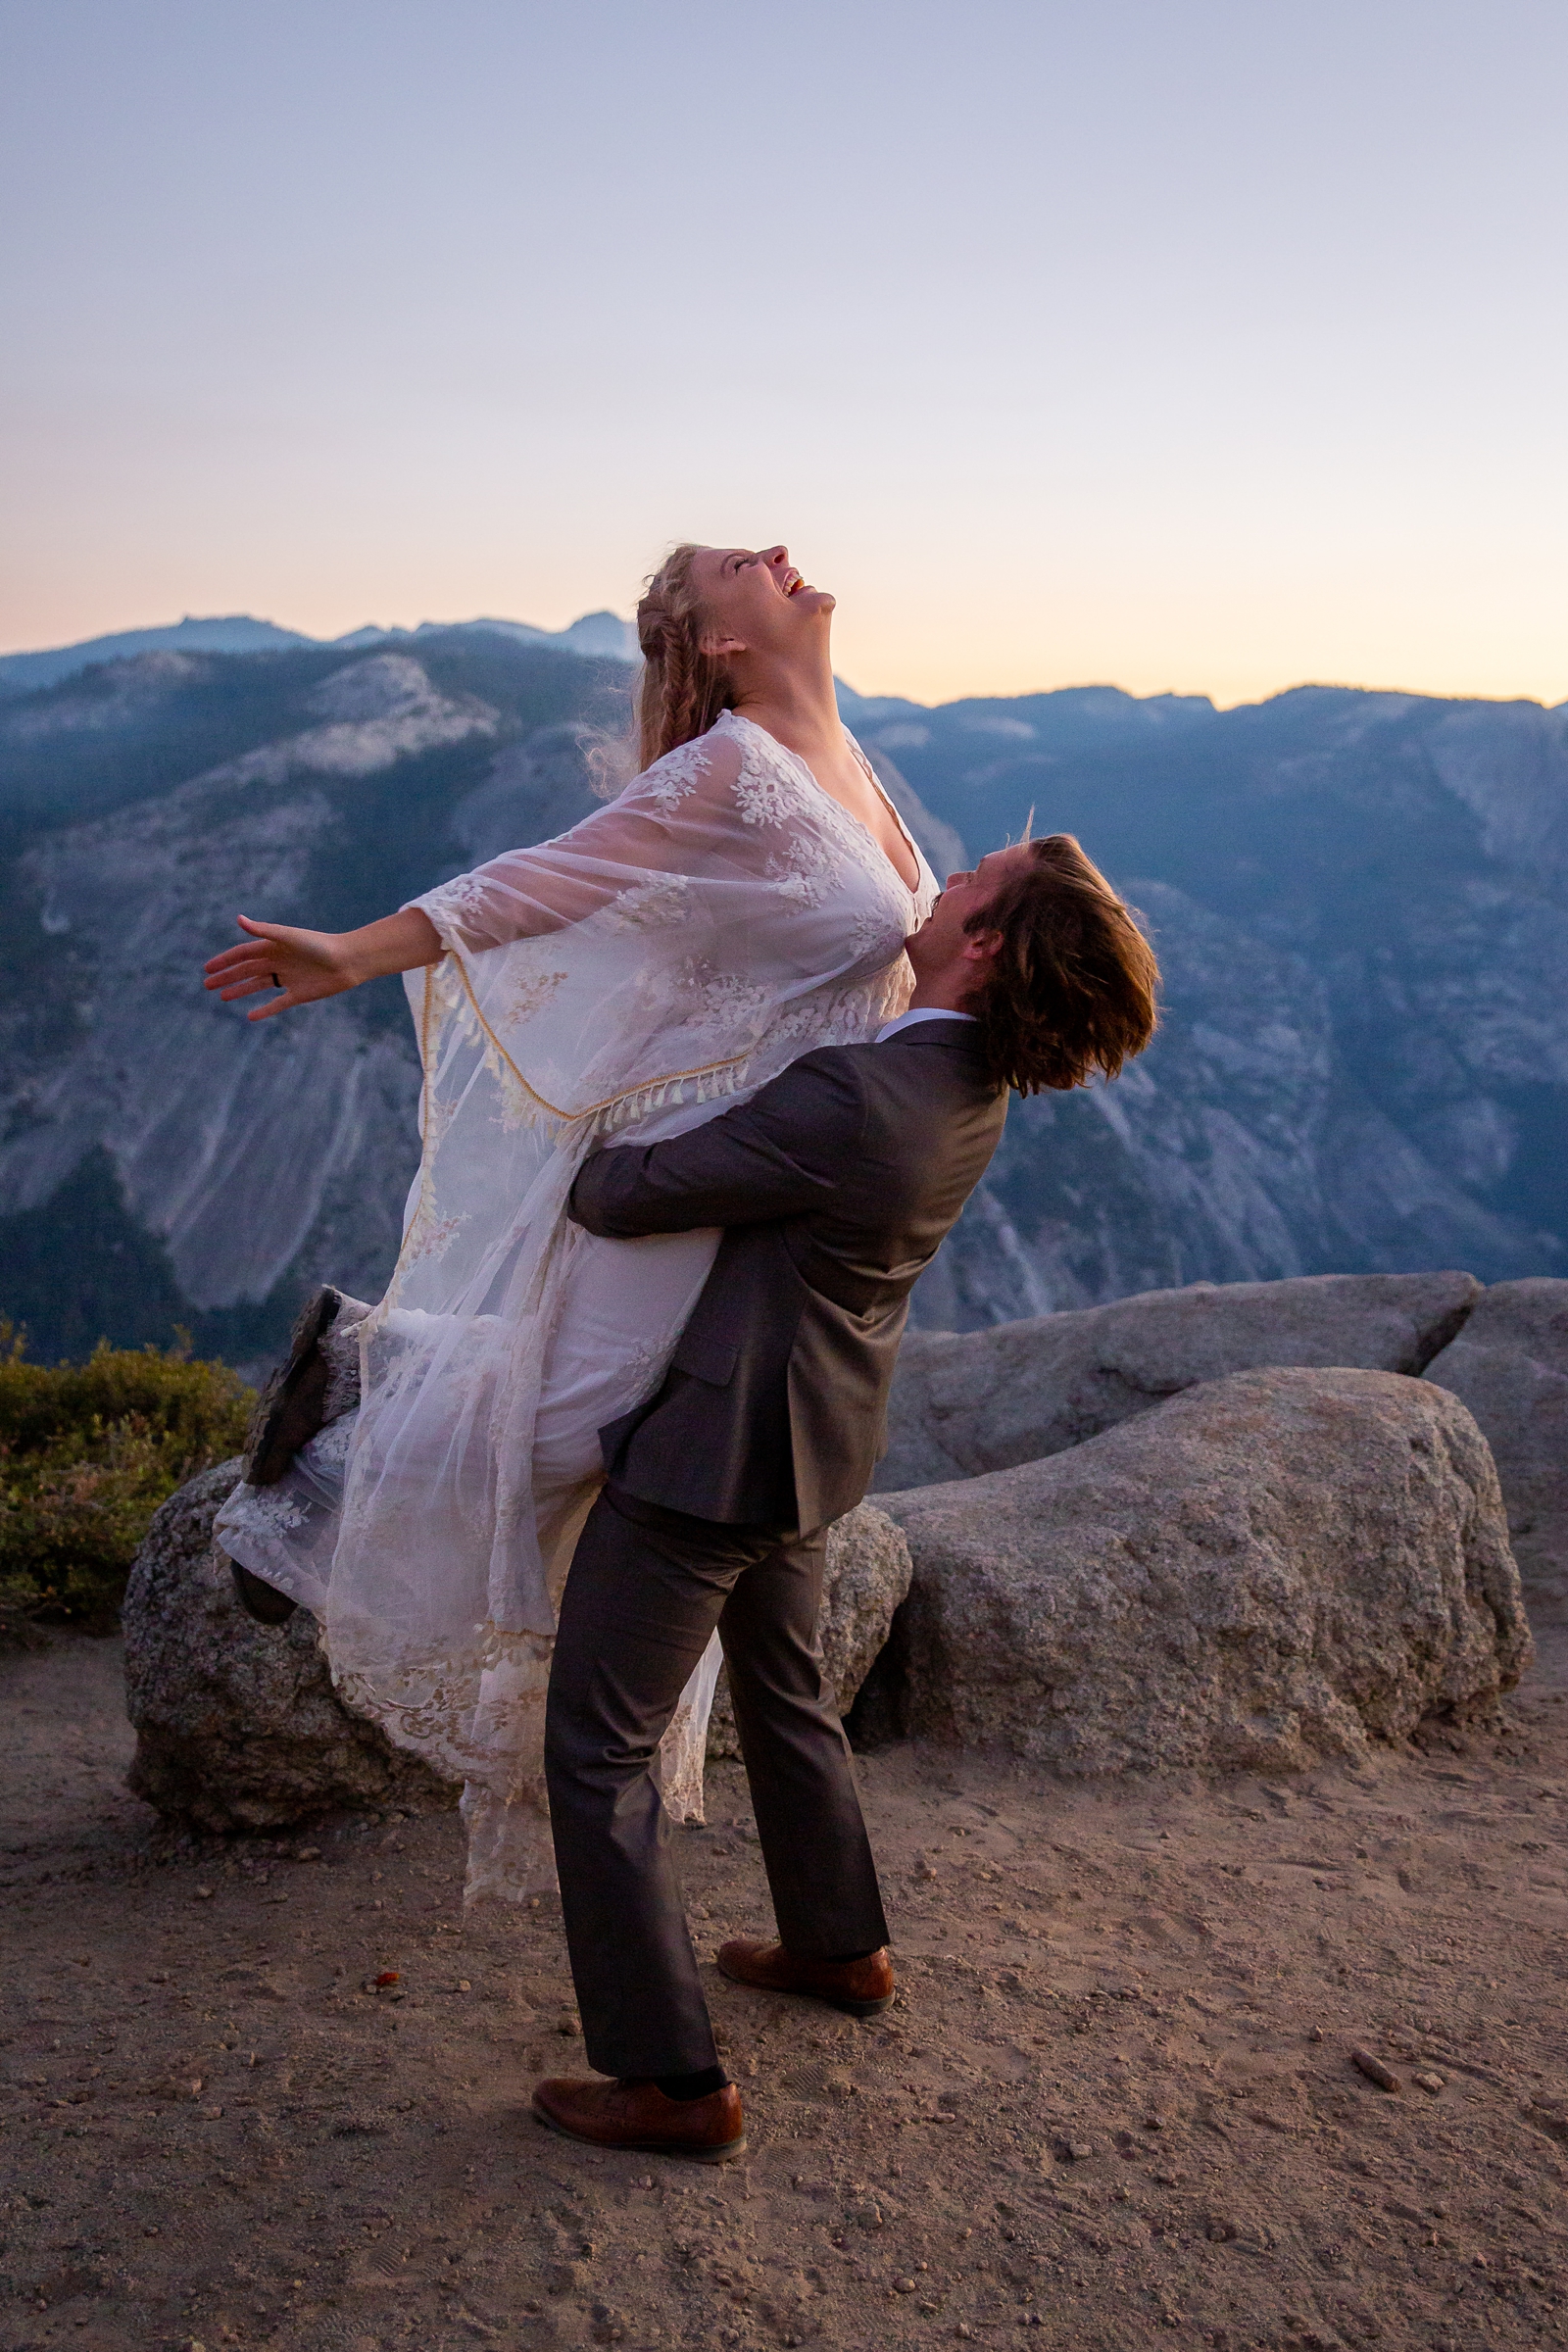 A playful eloping couple at Glacier Point in Yosemite.